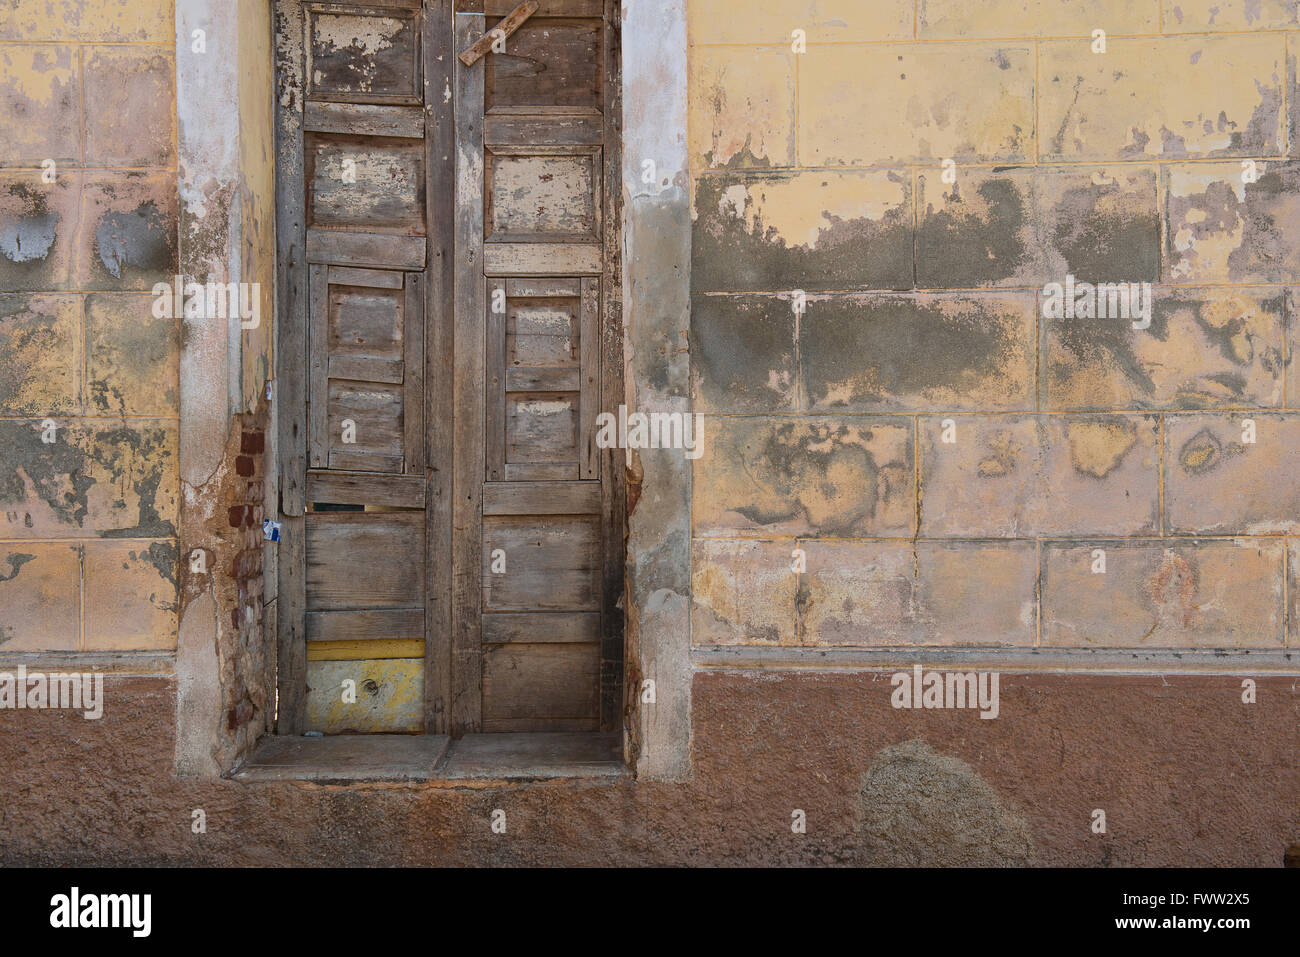 A wall of different colors and textures in the old Cuban town of Trinidad. Stock Photo